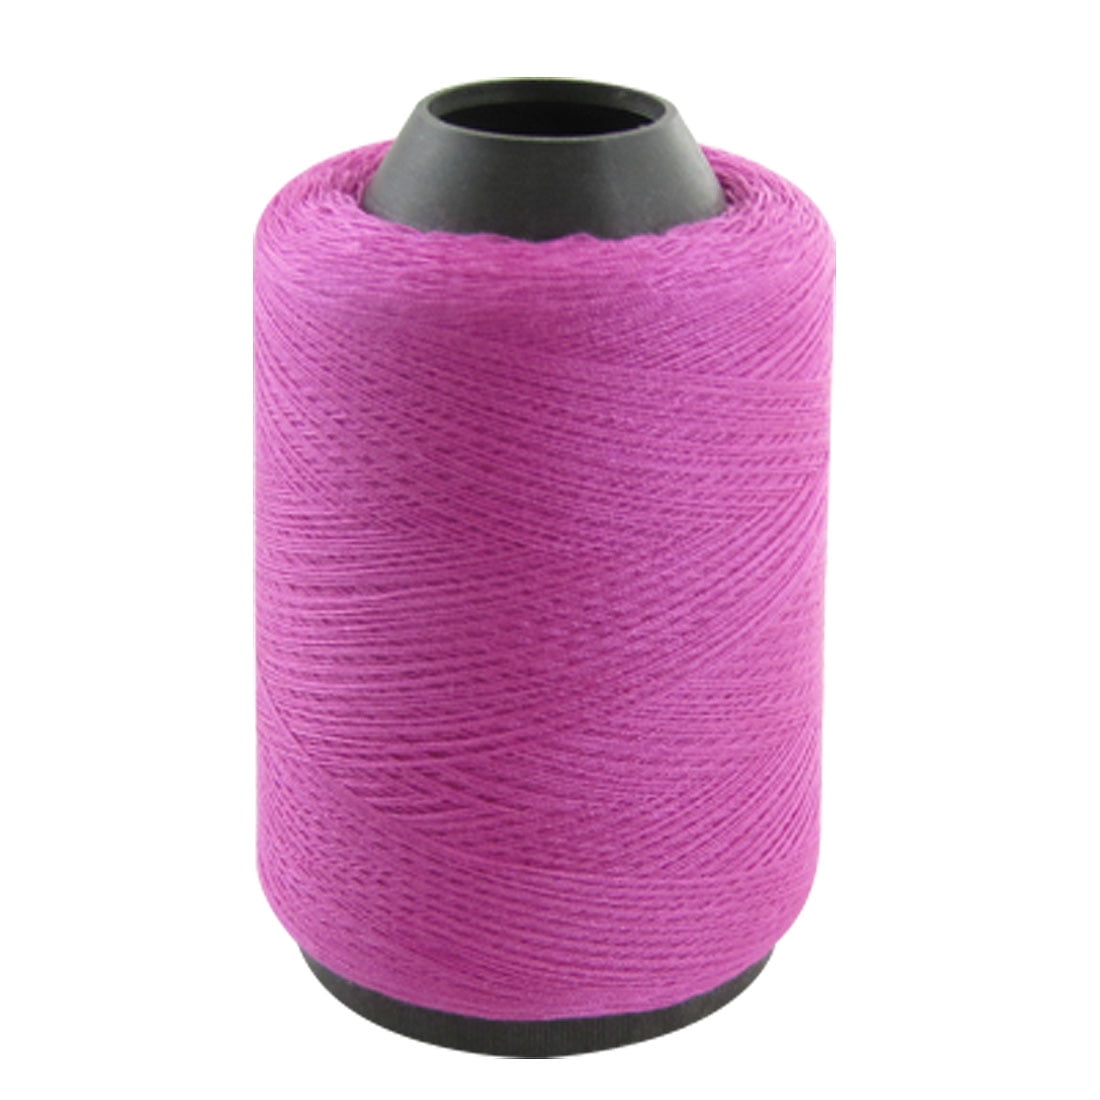 One Light Green Home and Commercial  Use Terylene Sewing Thread Cord 